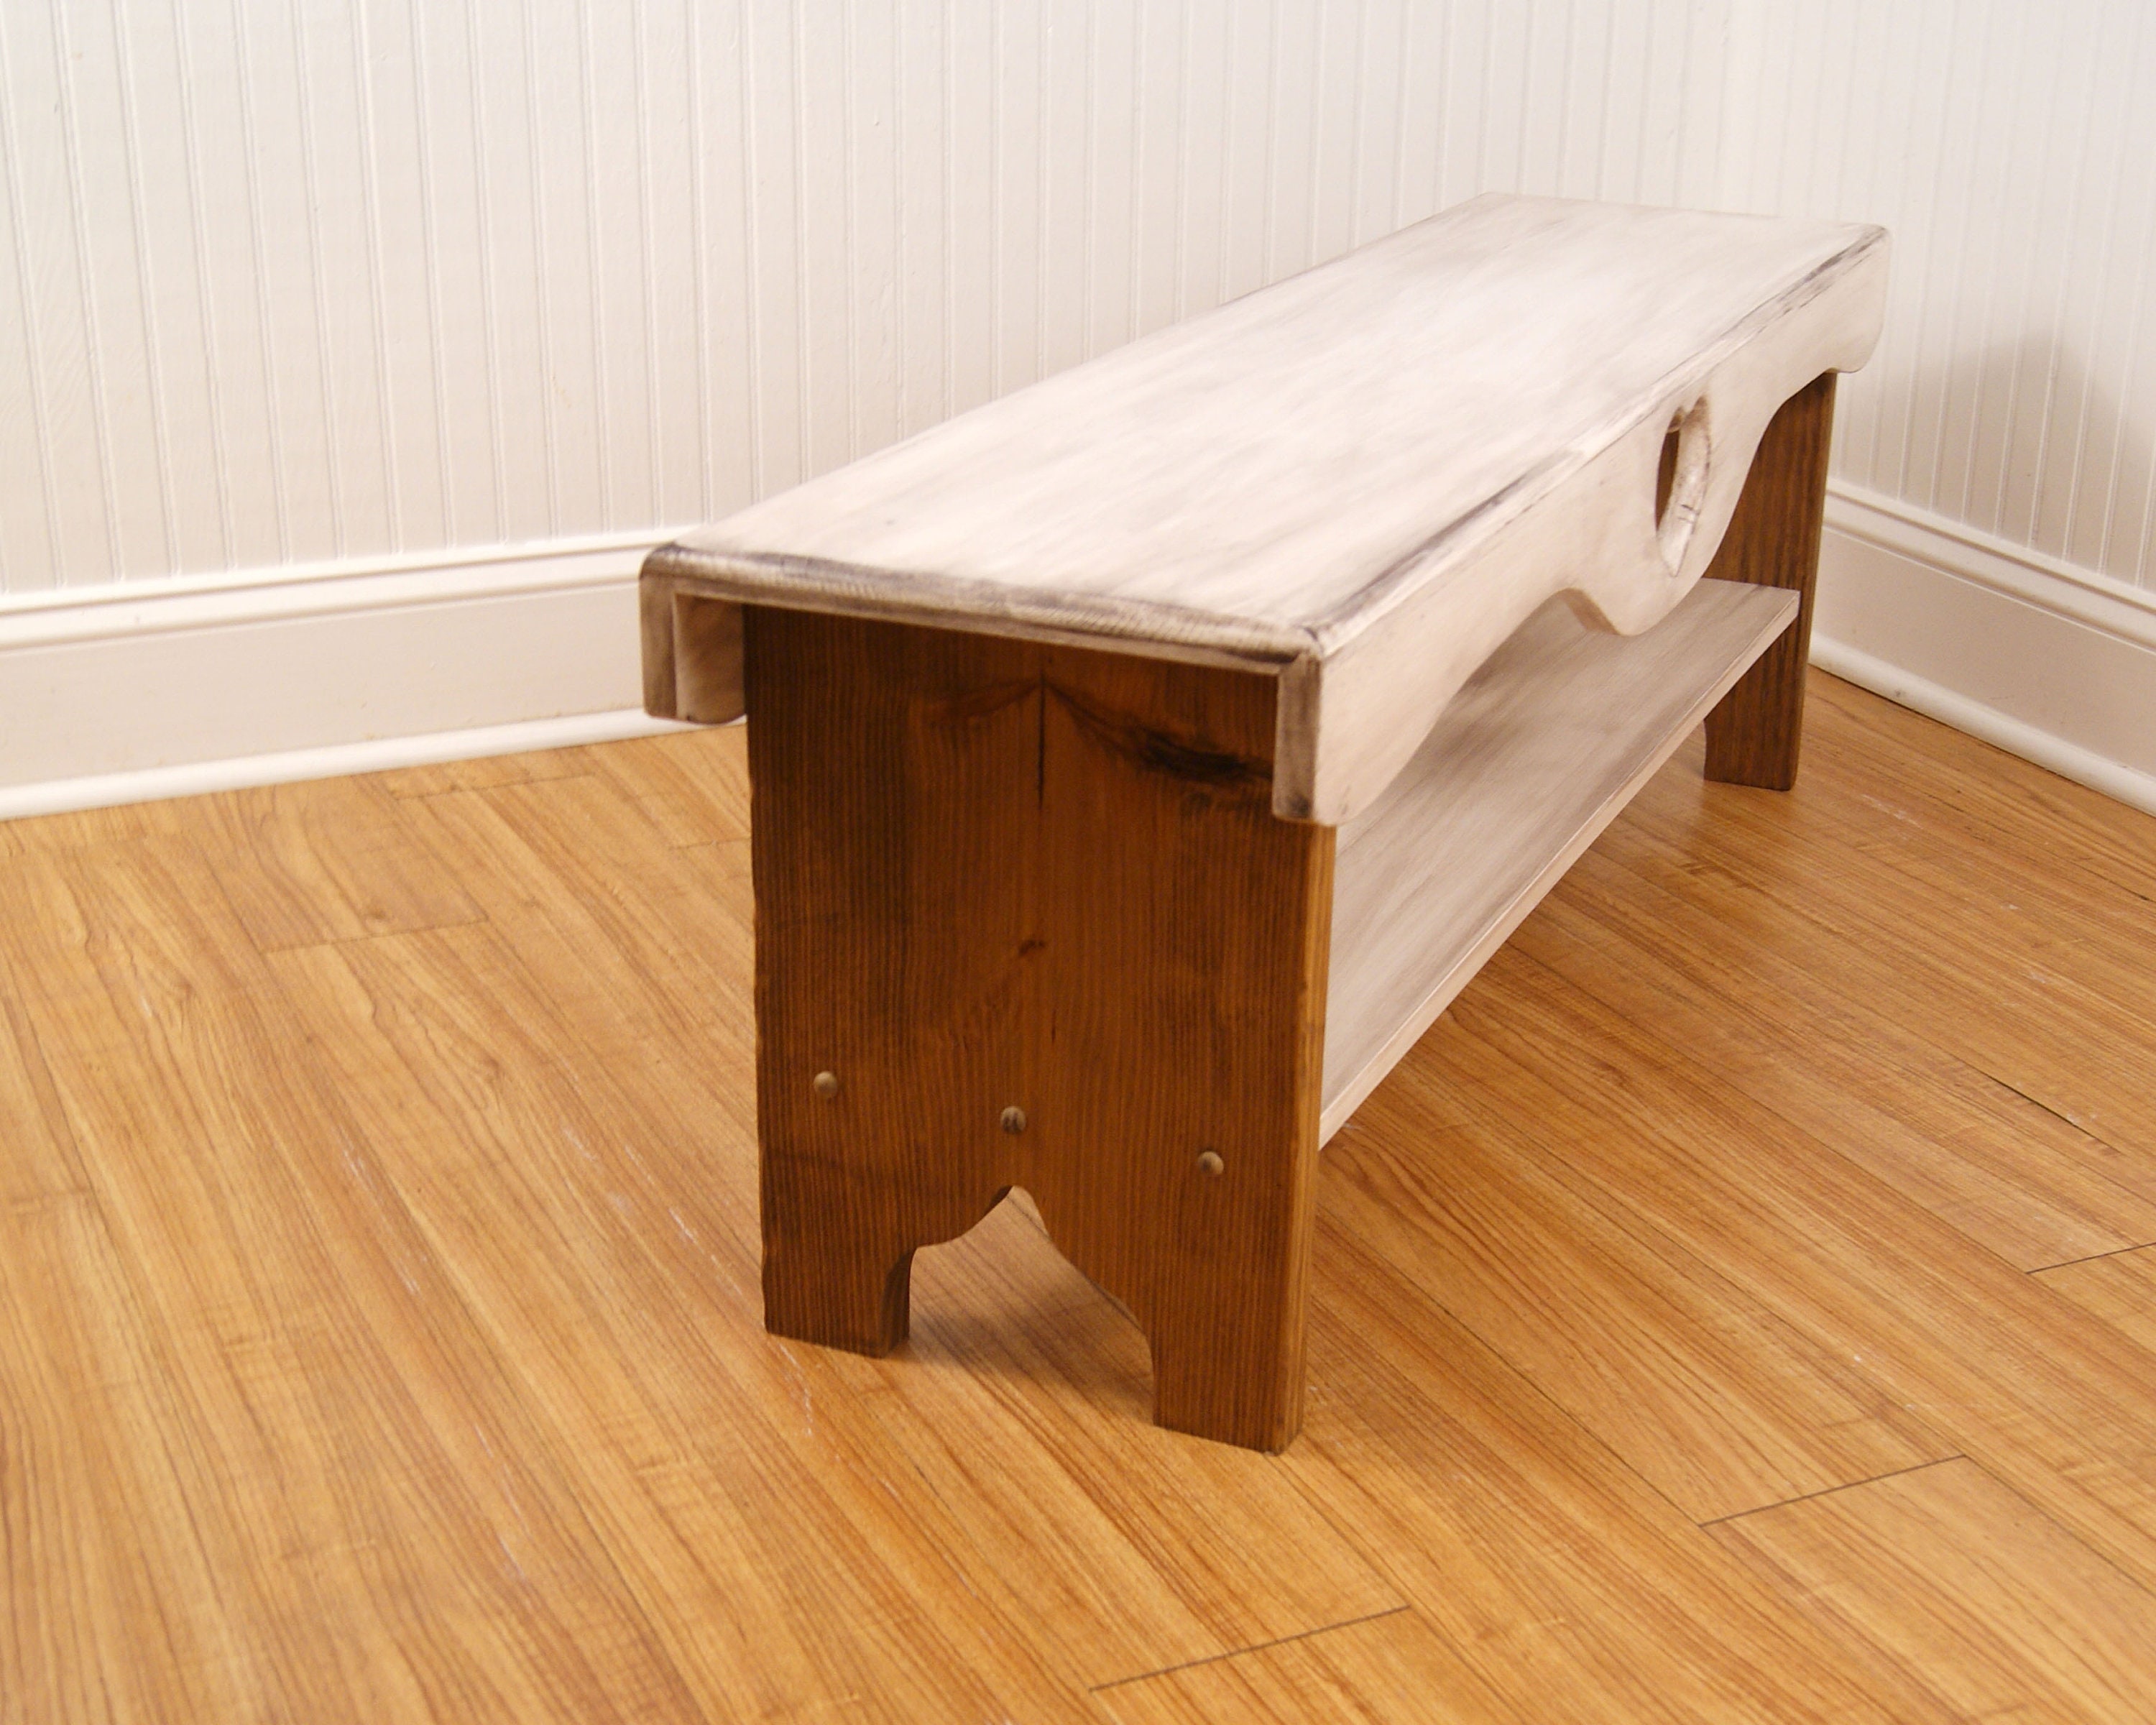 Farmhouse Bench, Bedroom Bench, Shaker Bench, Heart Bench, Bench with ...